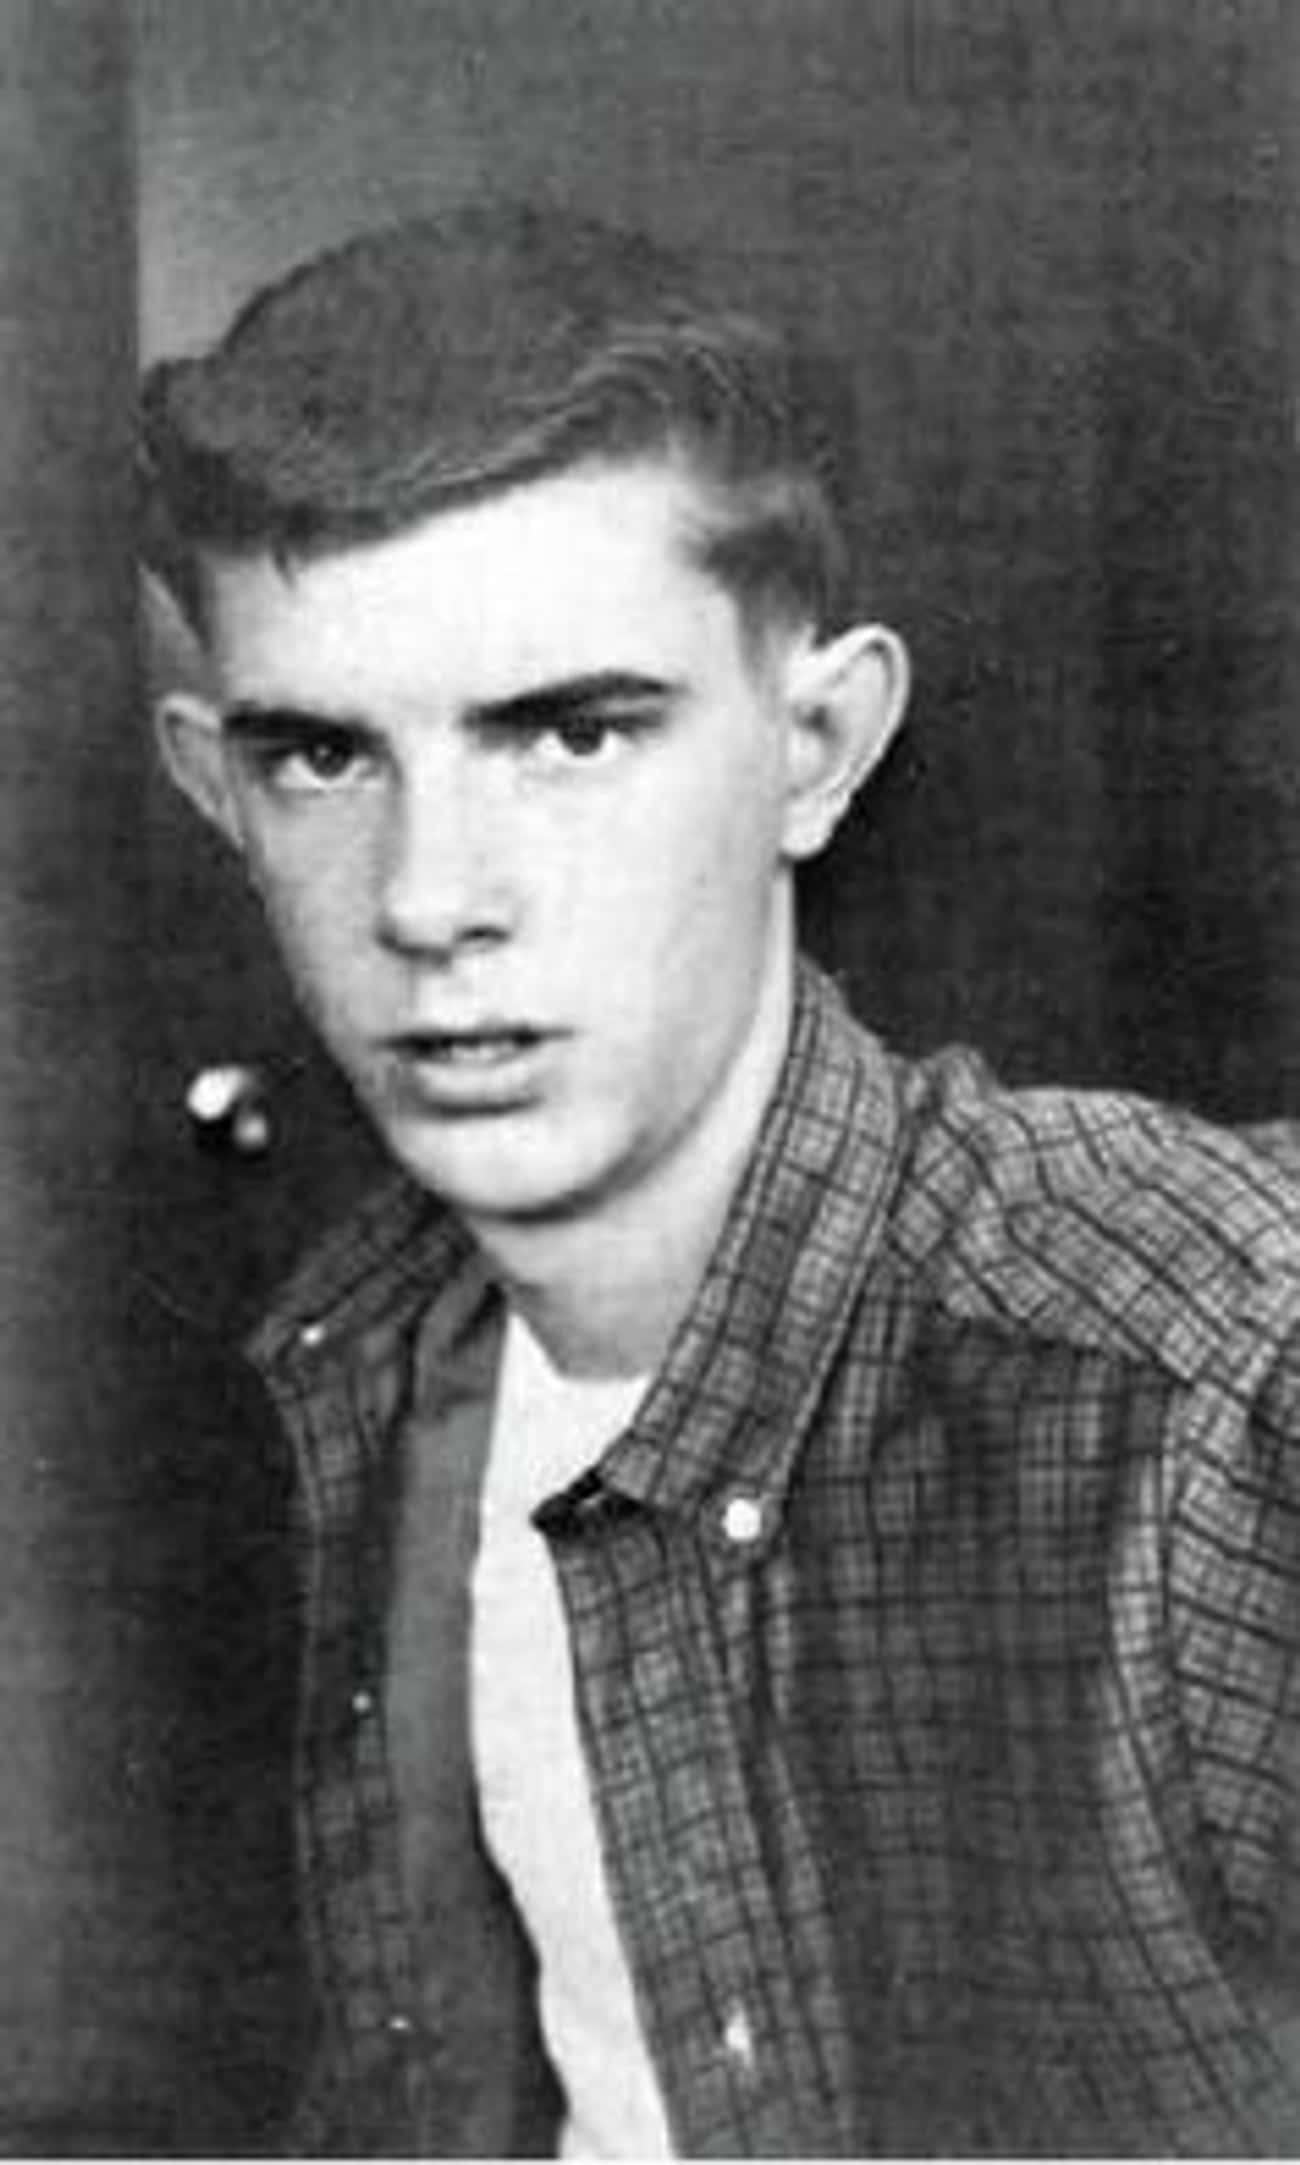 Young George Lucas as a Teenager